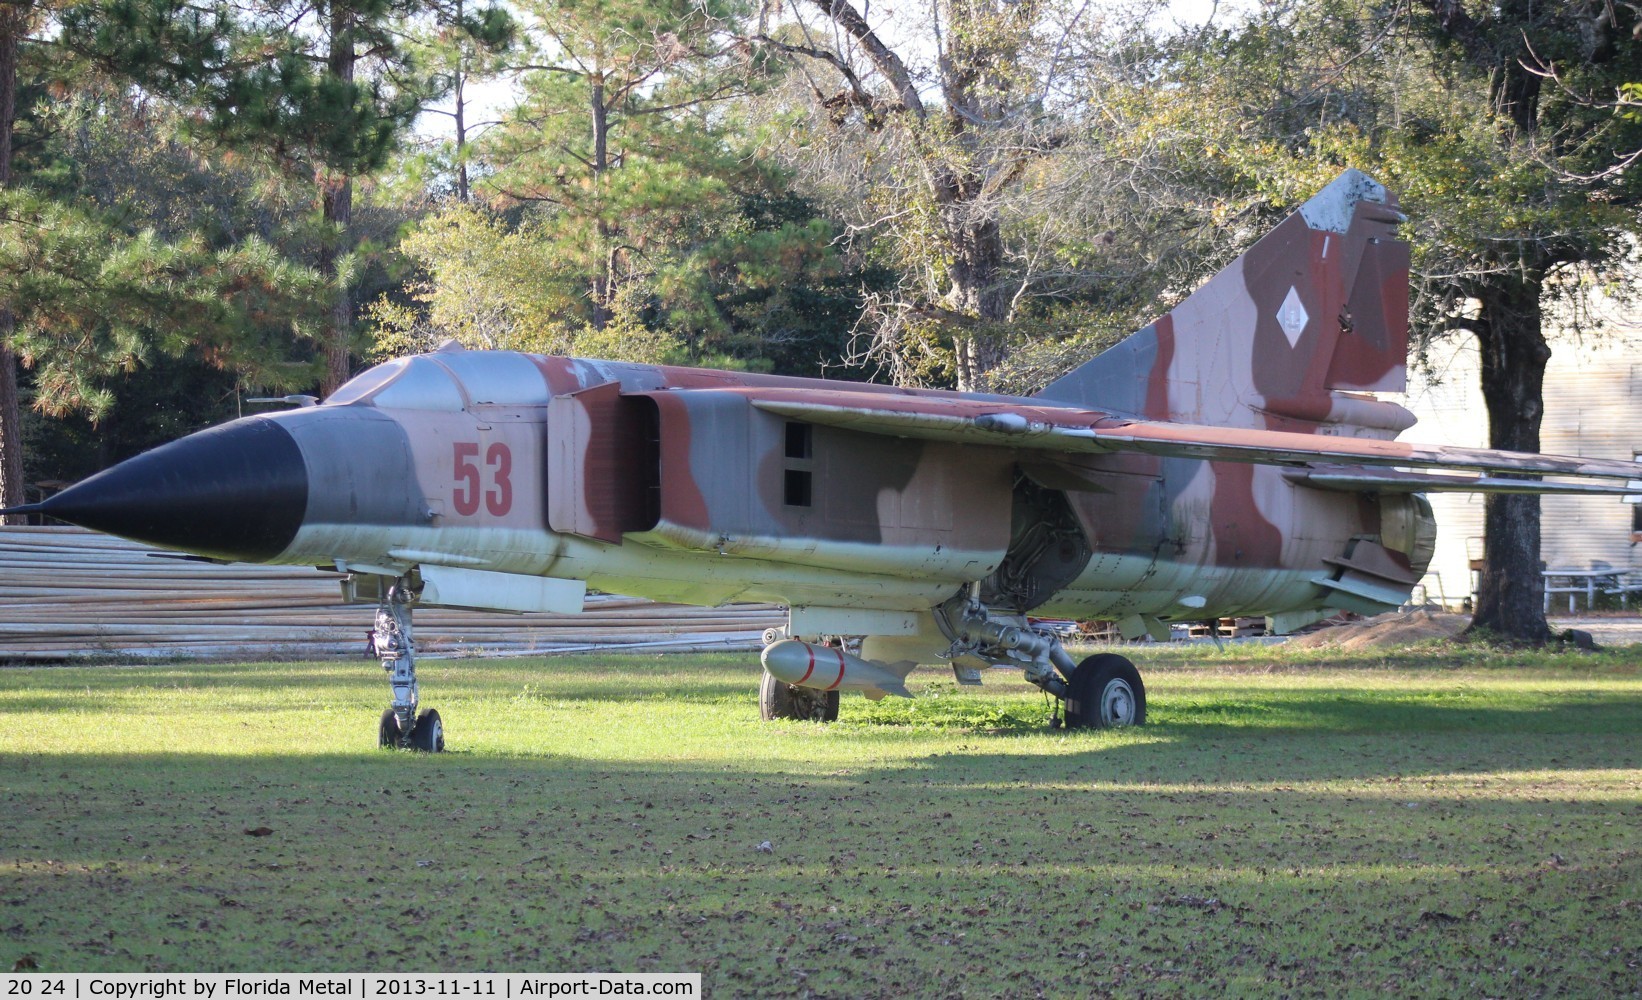 20 24, Mikoyan-Gurevich MiG-23 C/N Not found 20 24, Mig 23 located in a yard in the Panhandle of Florida